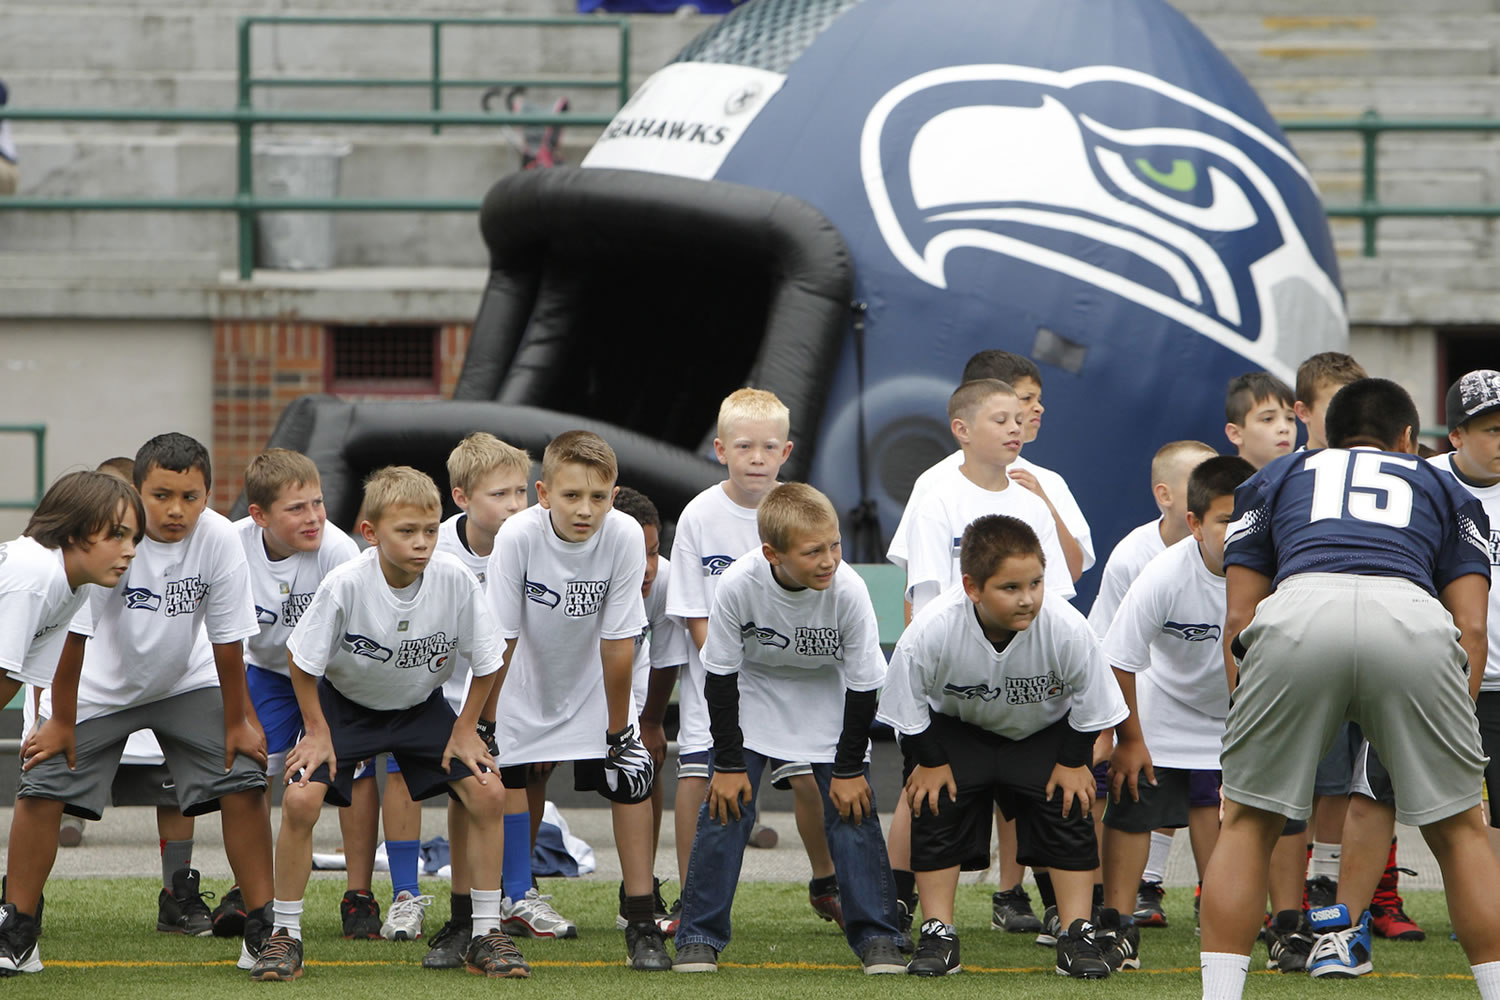 Kids get instructions during the Seahawks junior football training camp at Kiggins Bowl on Sunday.